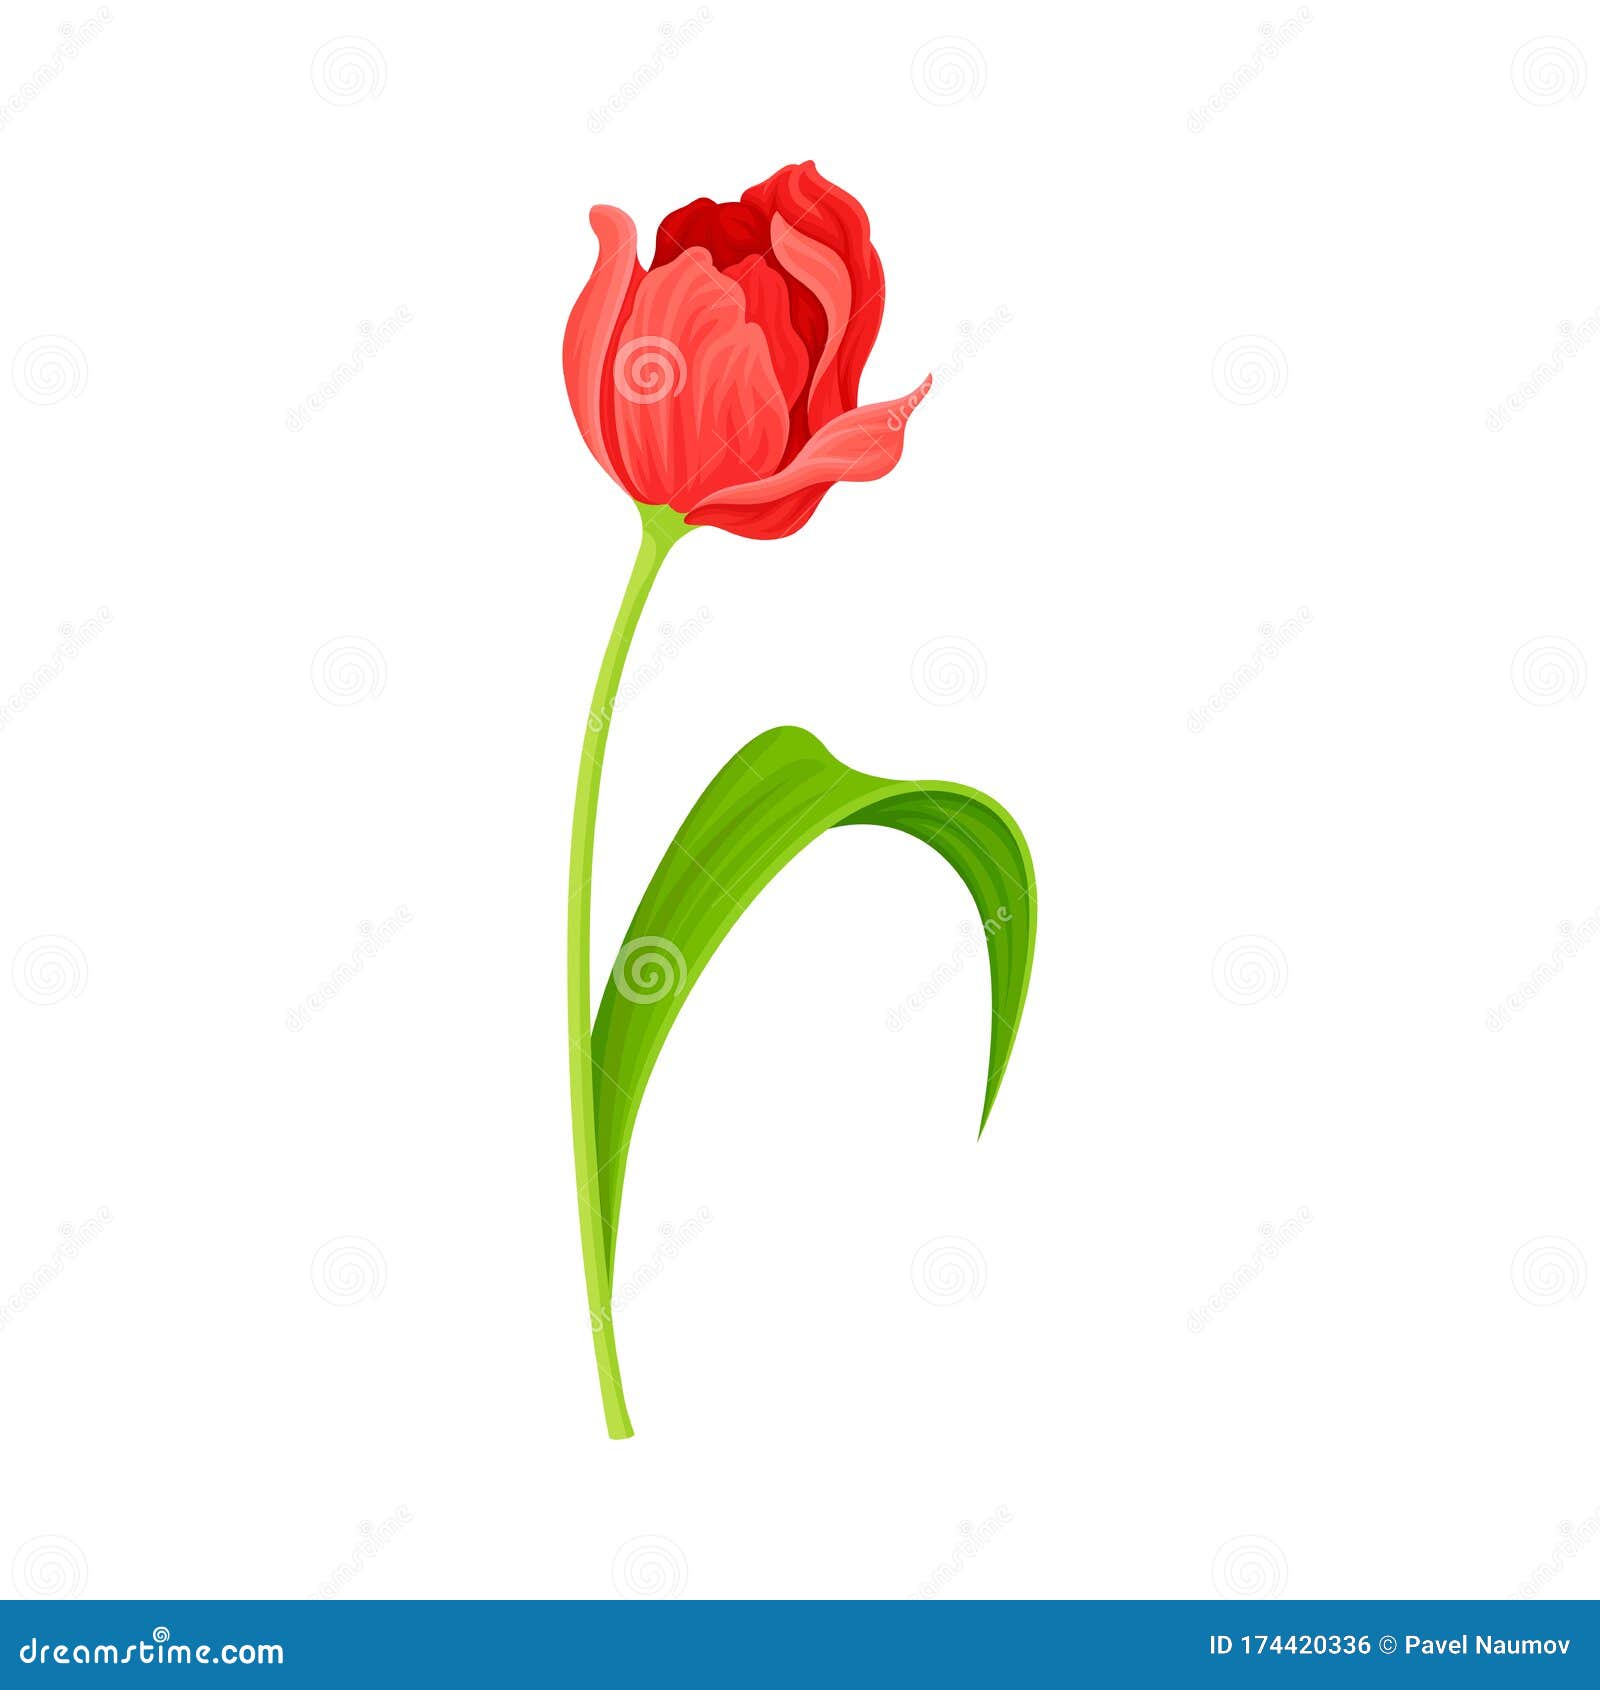 semi-closed red tulip flower bud on green erect stem with blade  